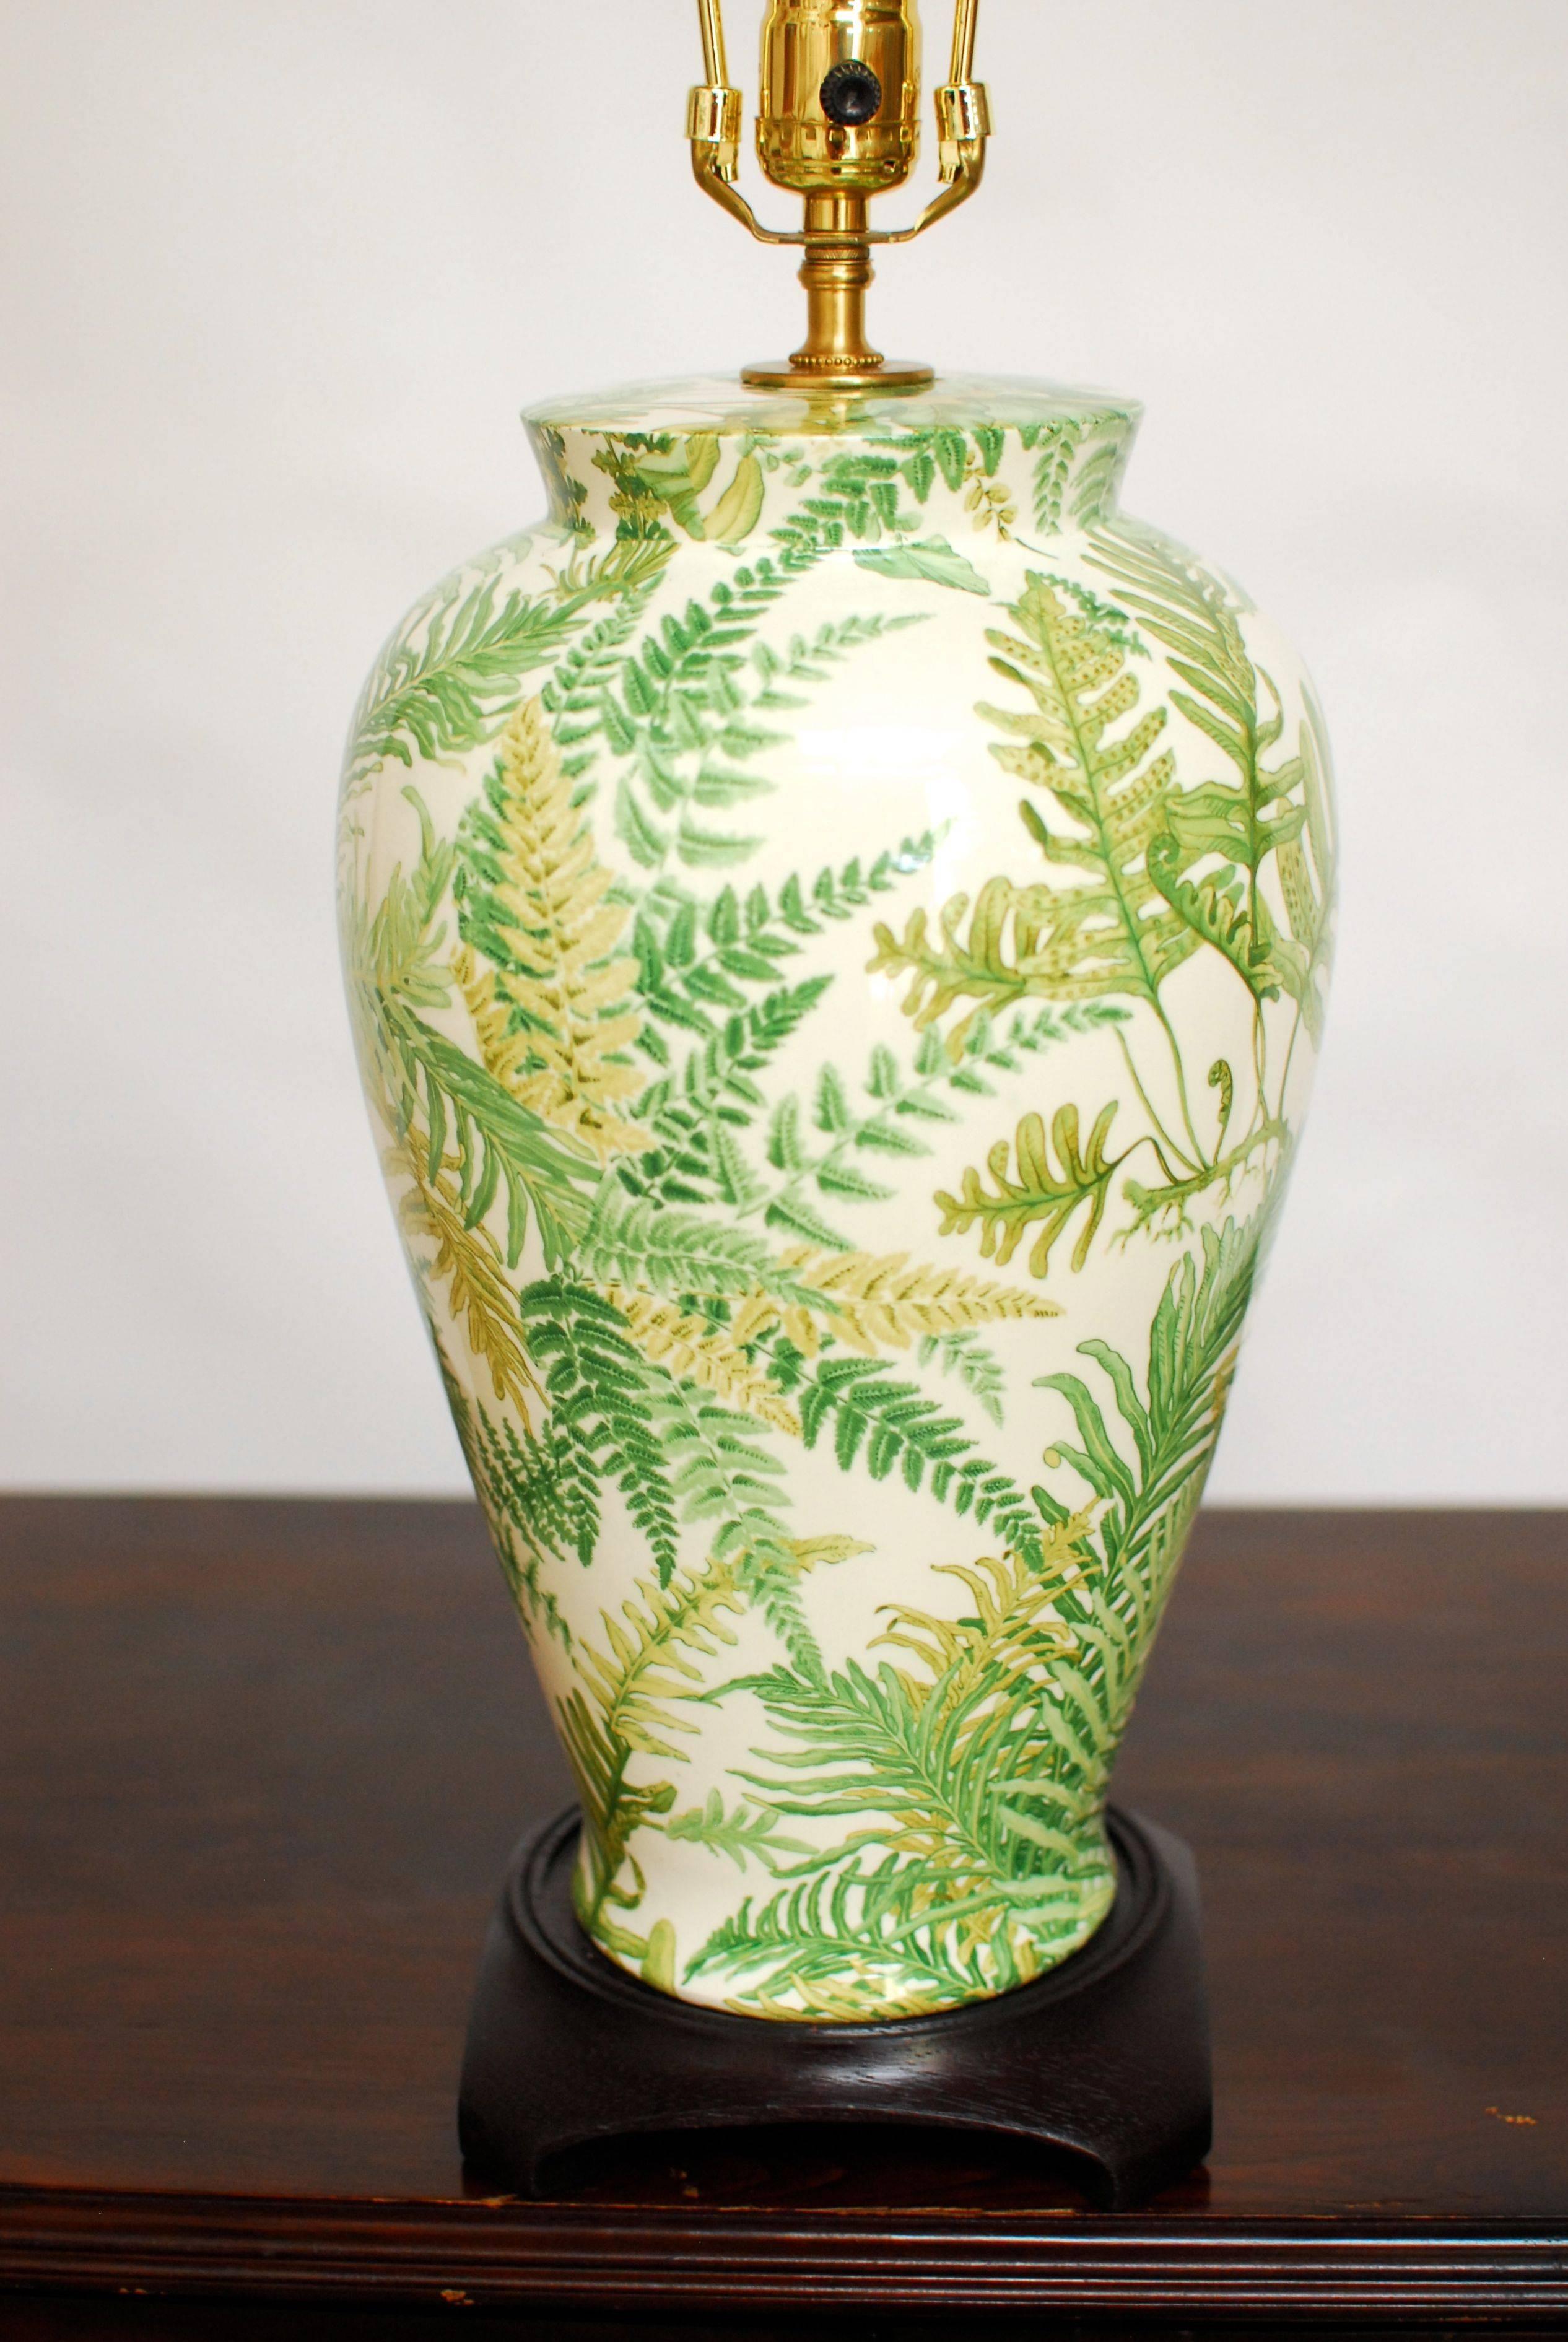 A decalcomania banana leaf ginger jar table lamp decorated with a foliate design. Sits on a carved wood base with an Asian inspired jar form. New brass hardware, harp and finial with no shade. Beautiful pattern with a white background. Purchased